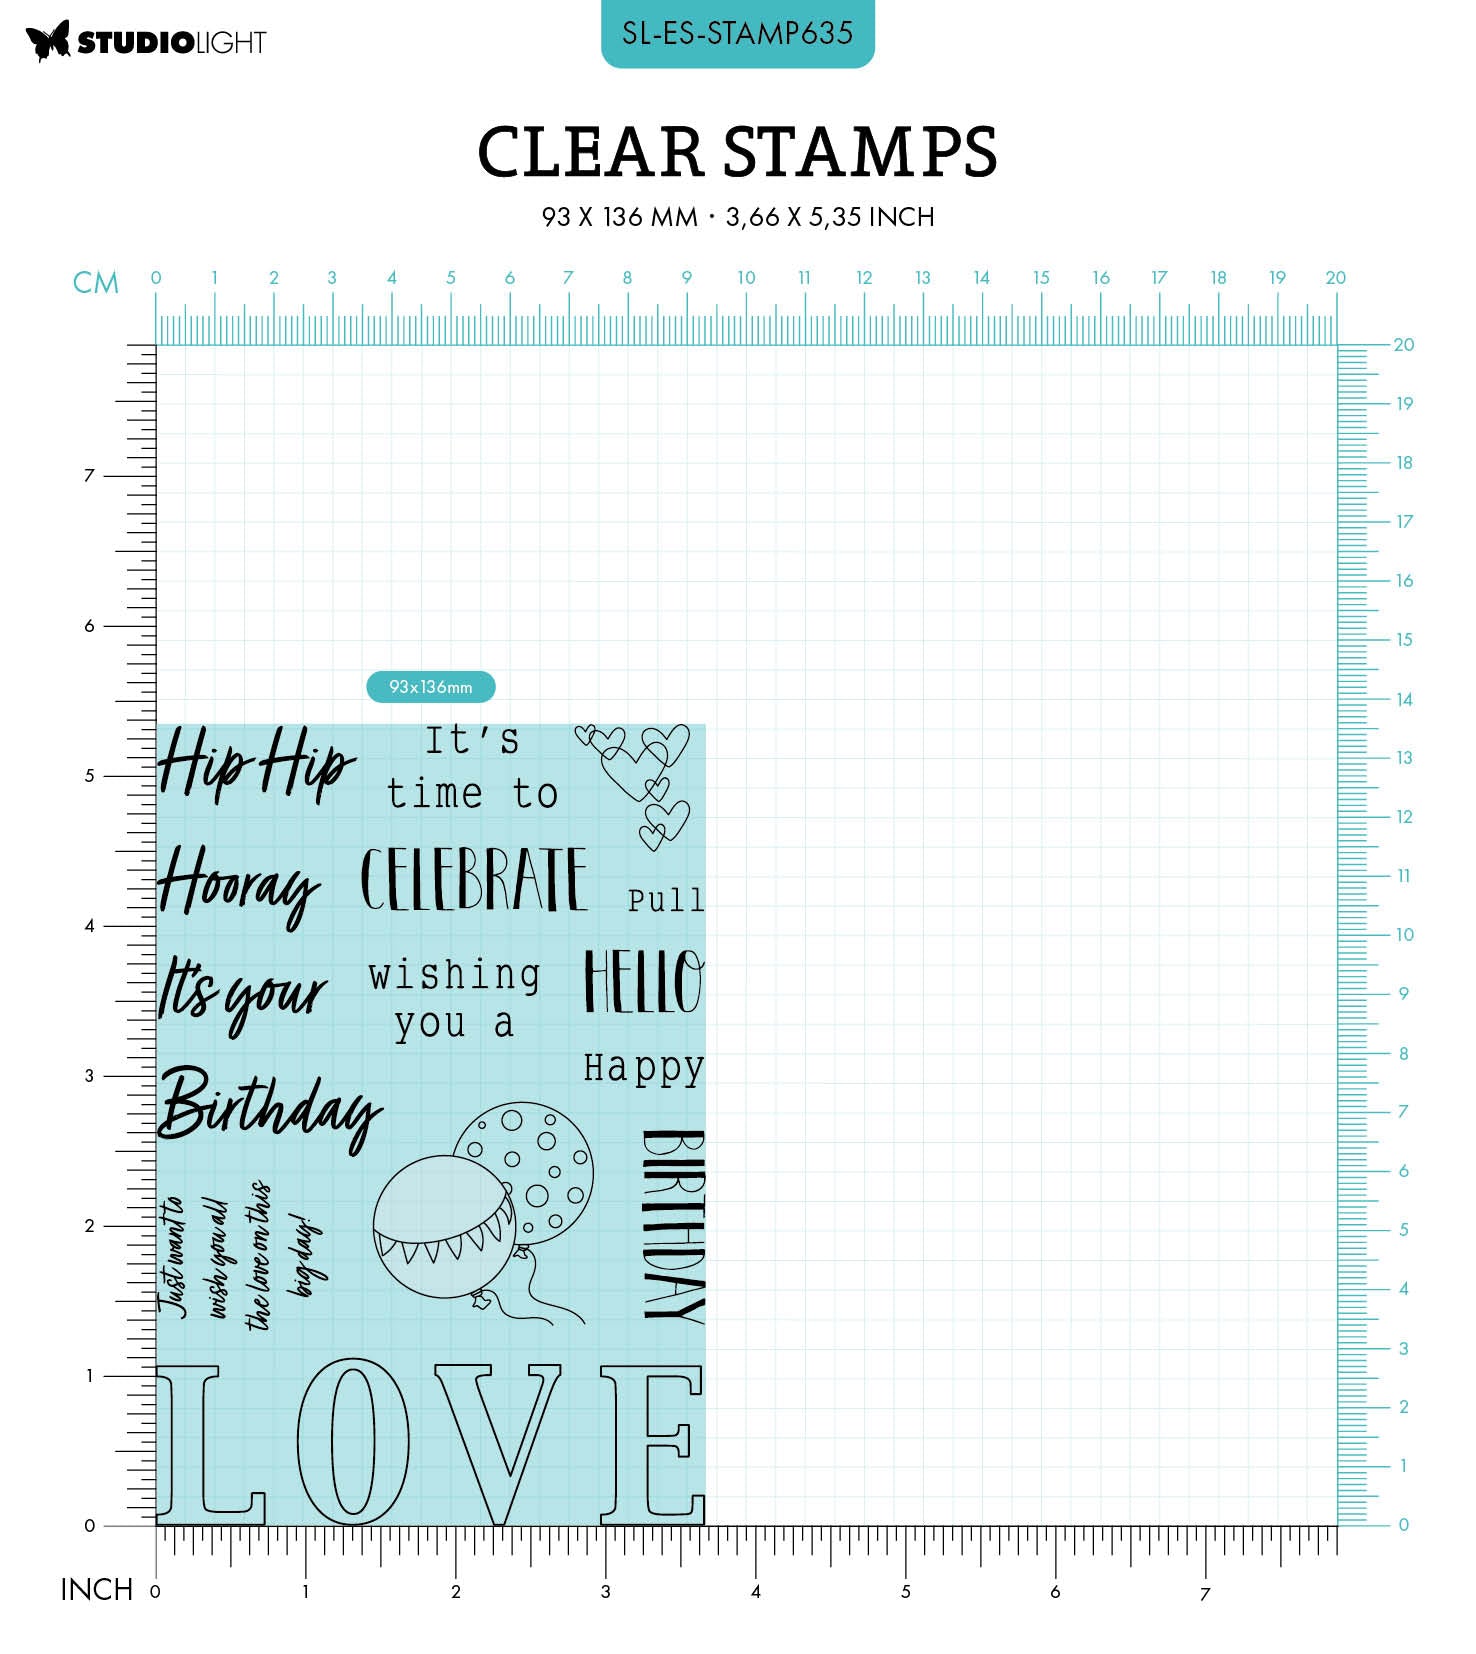 SL Clear Stamp Waterfall Effect Essentials 18 PC